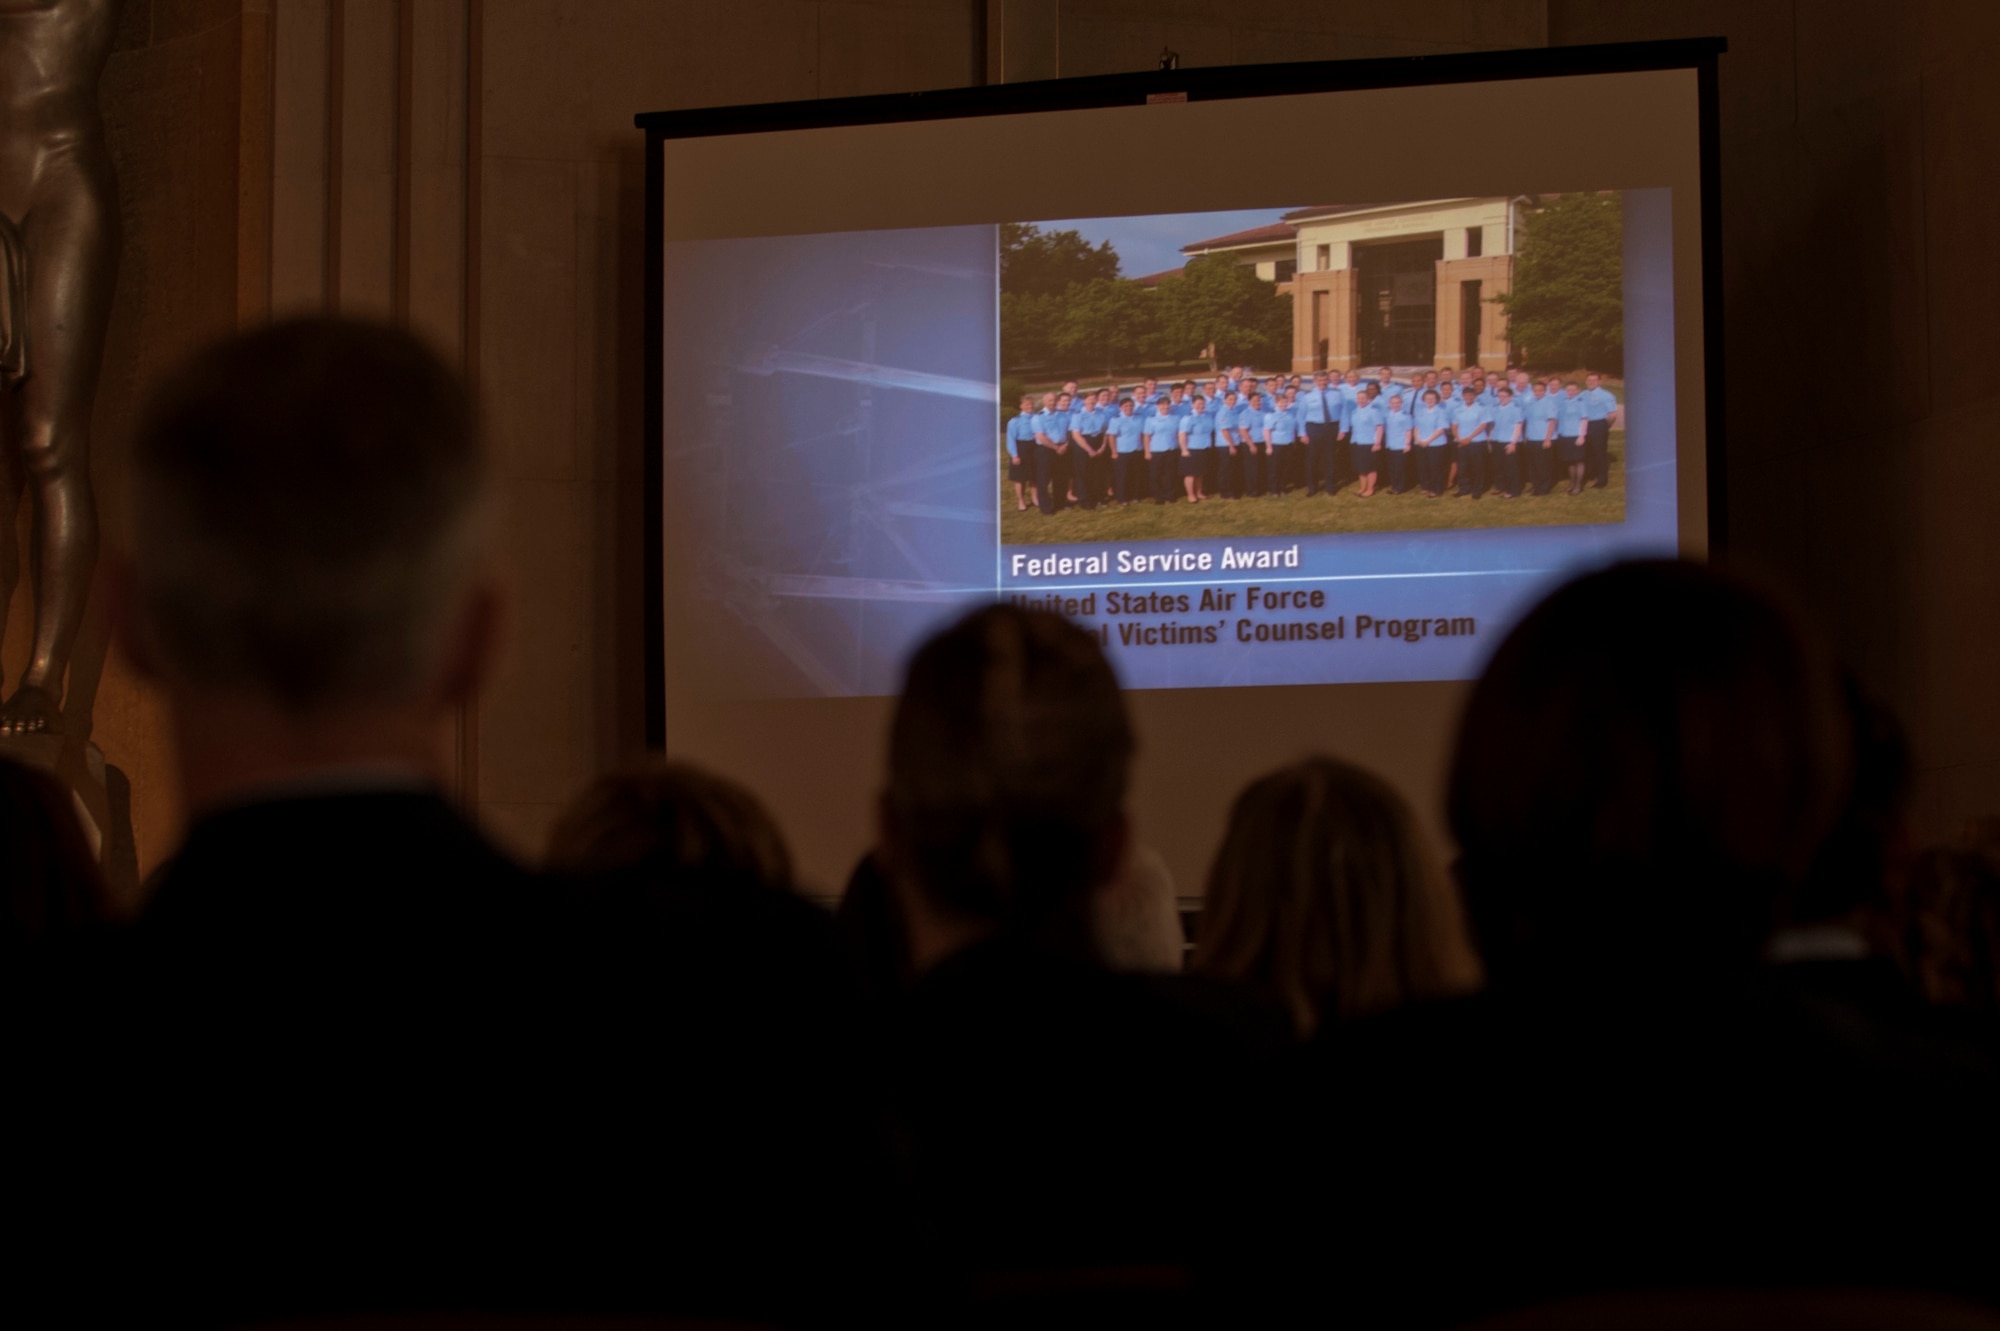 Members of the Air Force Judge Advocate General’s Corp watch their award video during the 2014 Justice Department’s National Crime Victims’ Rights Service Awards ceremony April 9, 2014 at the Department of Justice, Washington D.C.  The JAG Corps received the Federal Service Award for their work on their Special Victims’ Counsel program. (U.S. Air Force photo/Staff Sgt. Carlin Leslie)